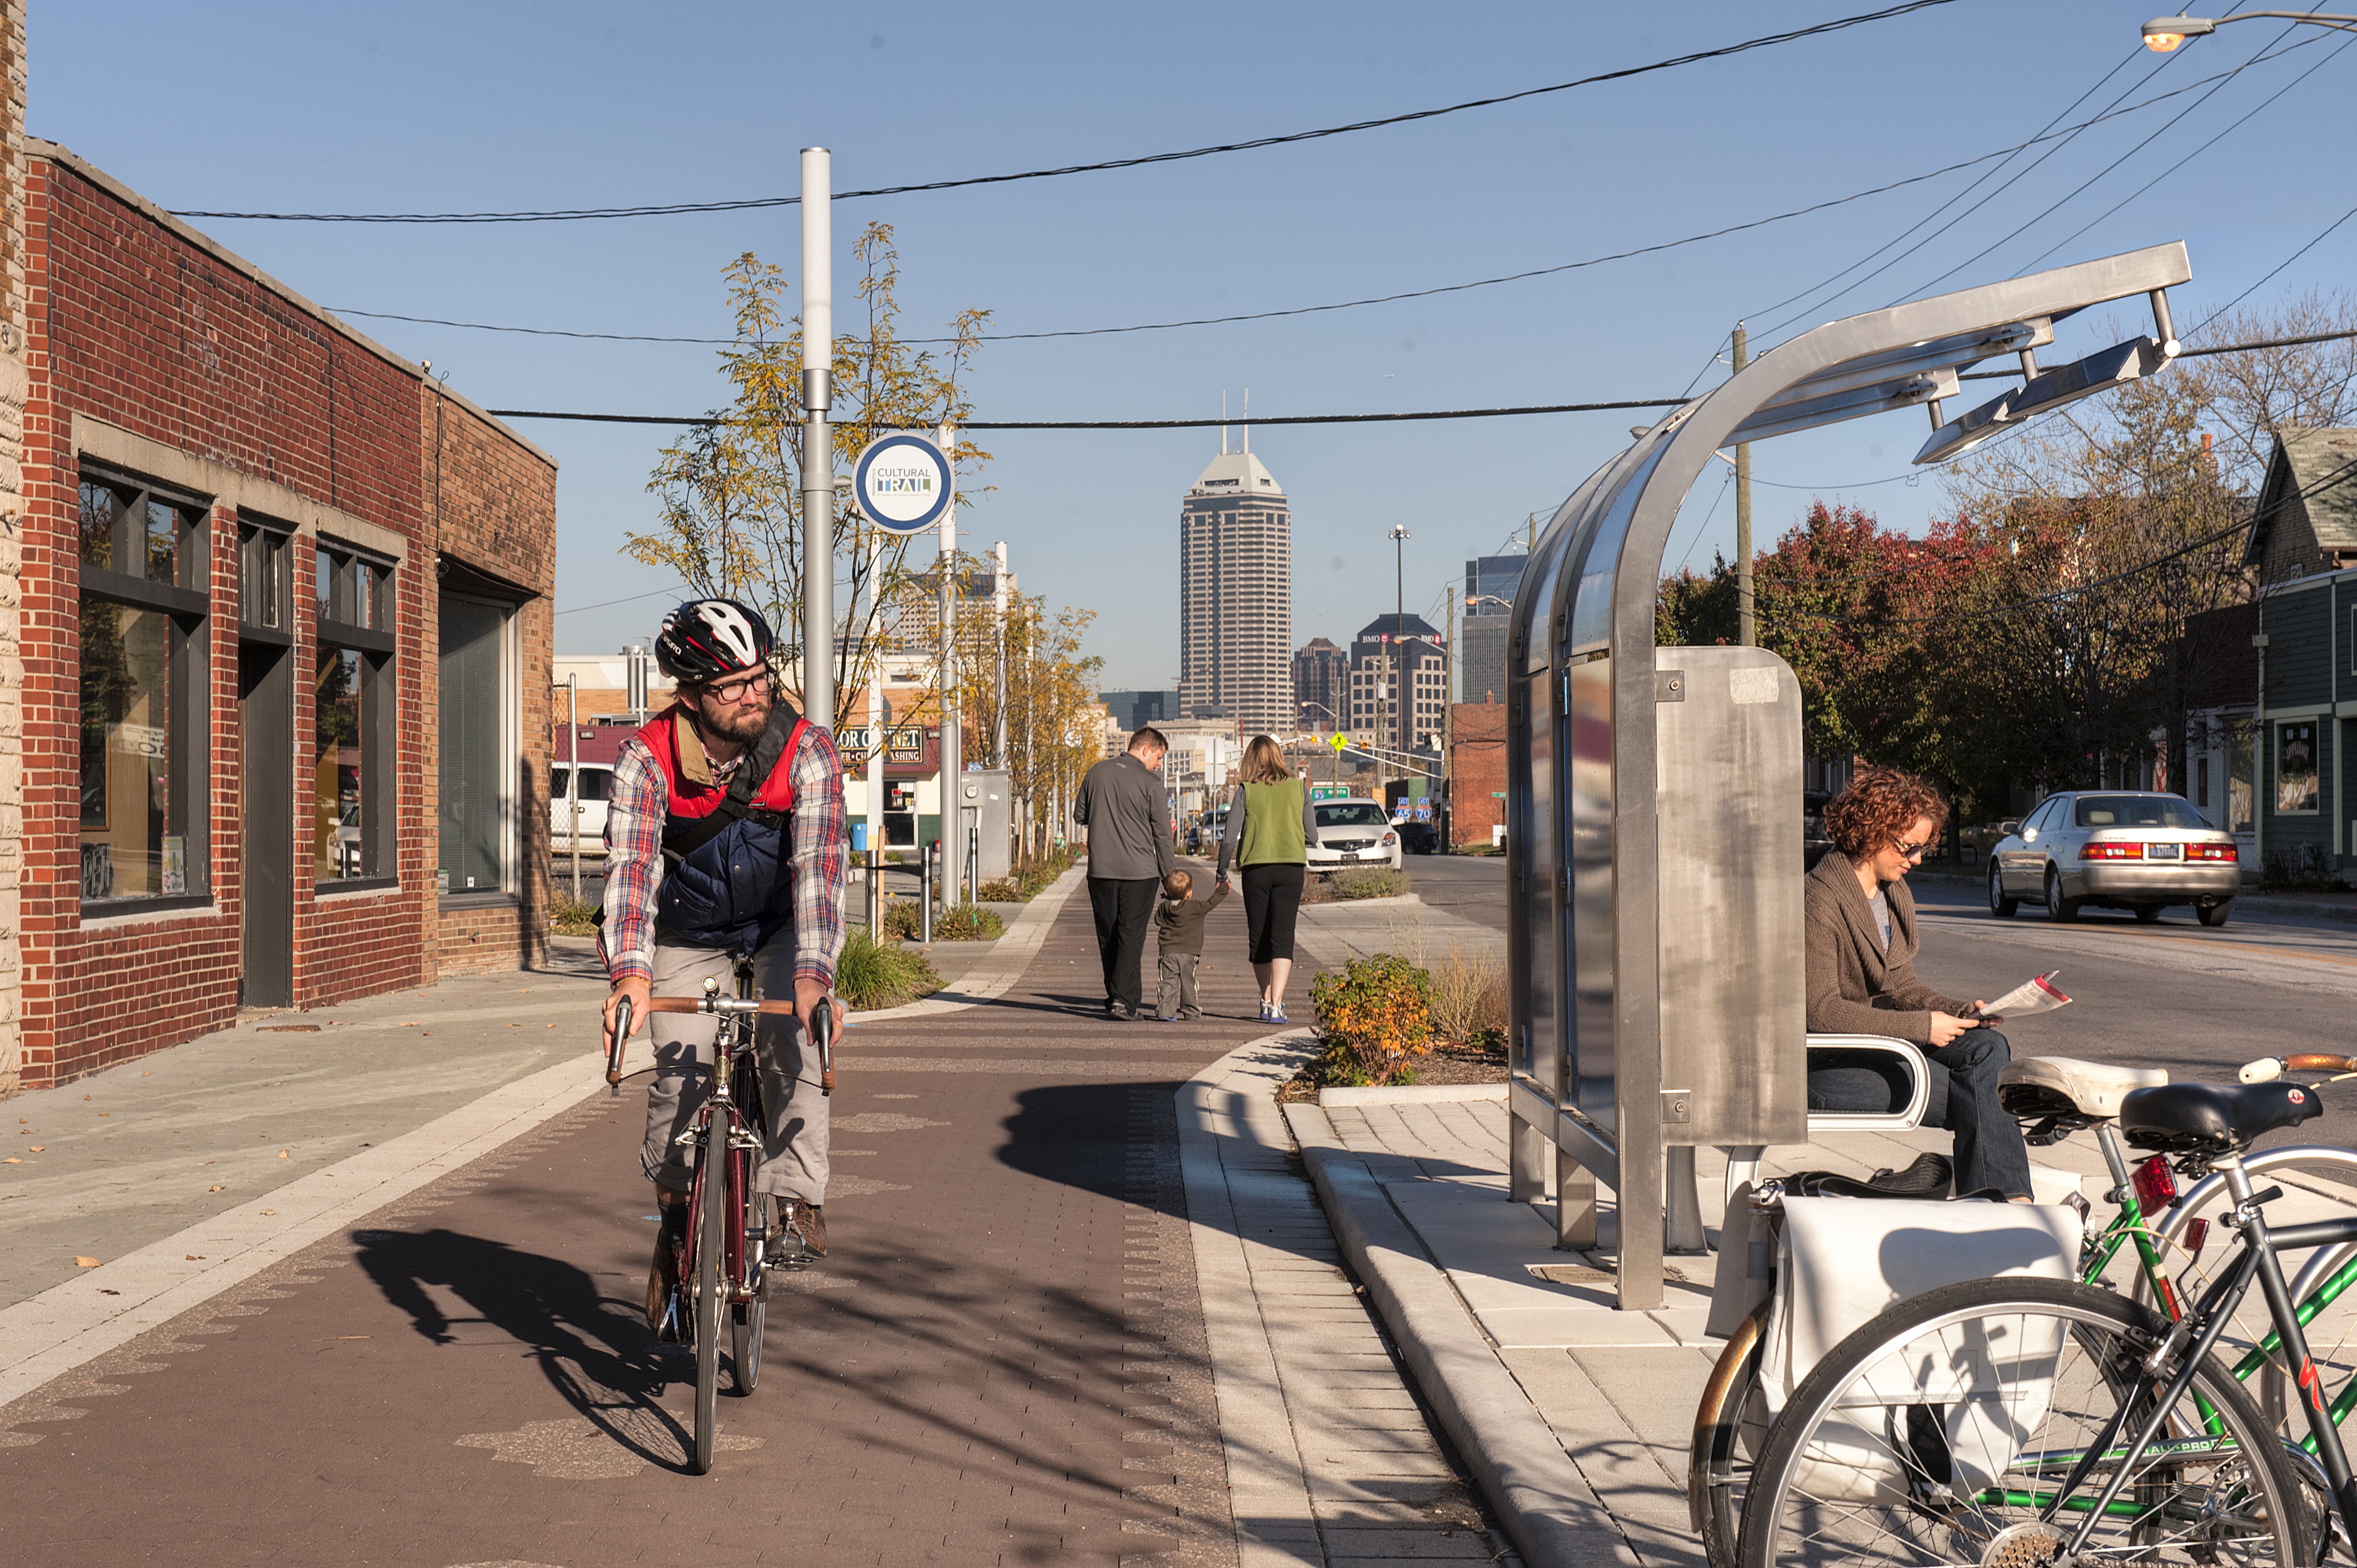 The ICT supports multimodal connectivity with custom designed transit stops along the trail corridor.